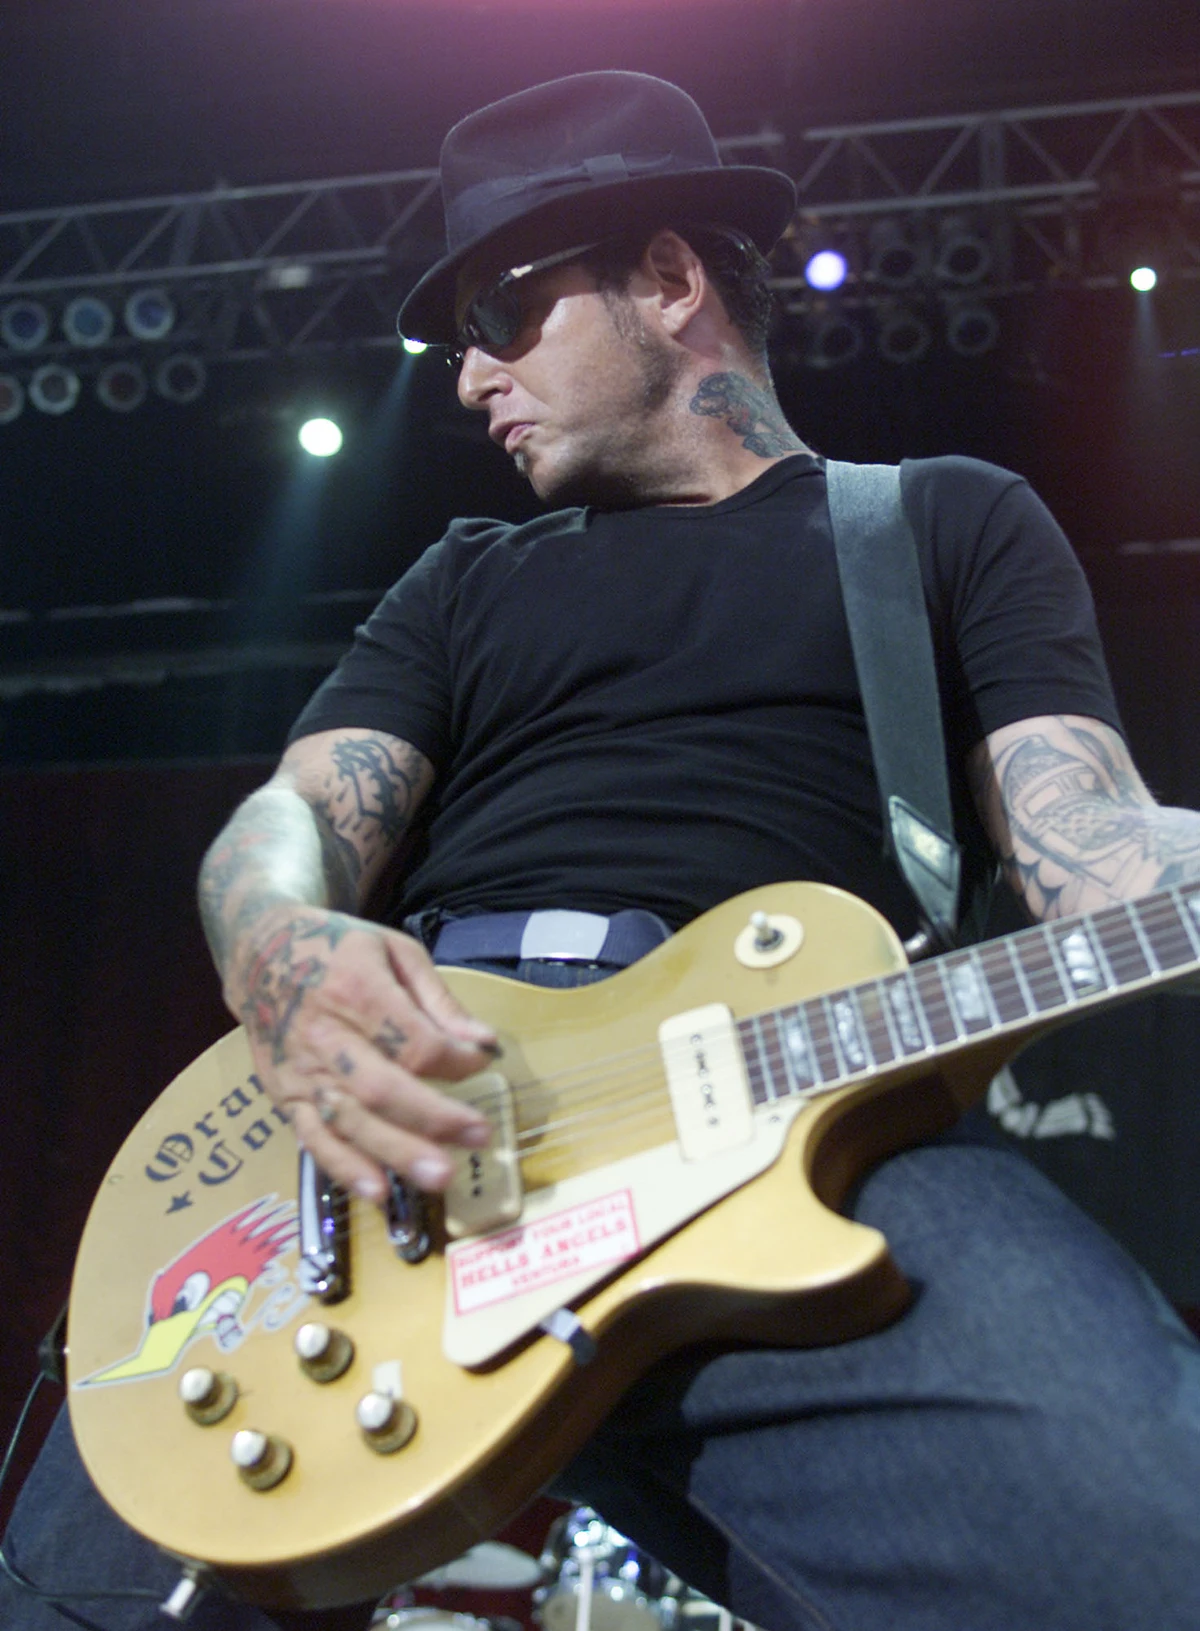 Mike Ness Of Social Distortion Talks Tour, Book And New Record Projects